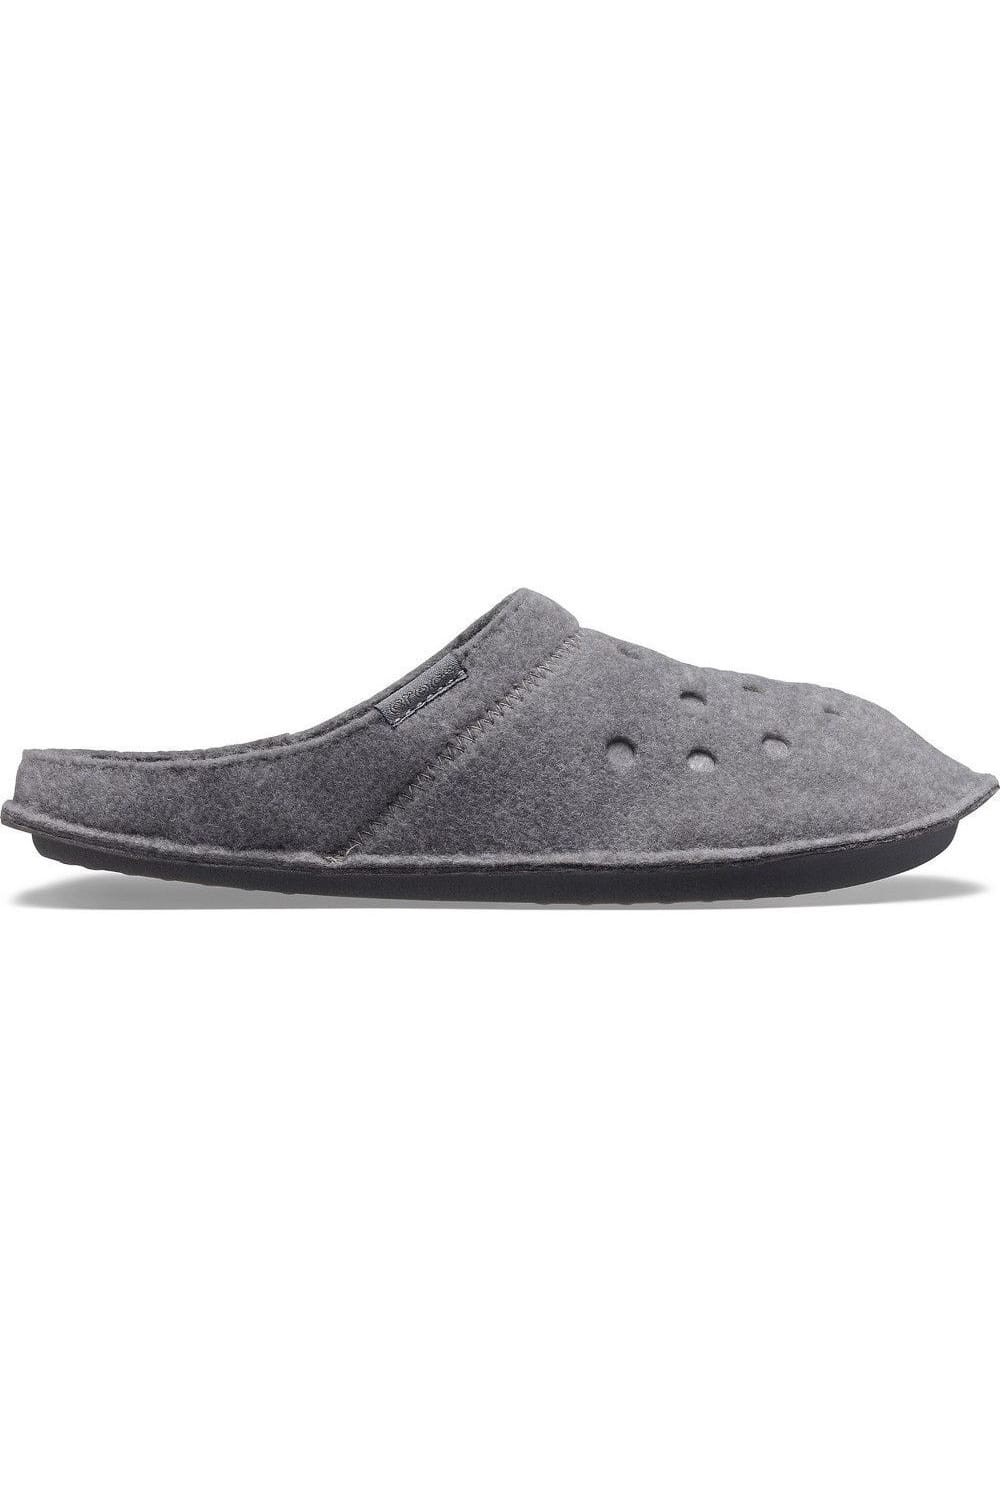 Unisex Adult Classic Slippers (Charcoal)